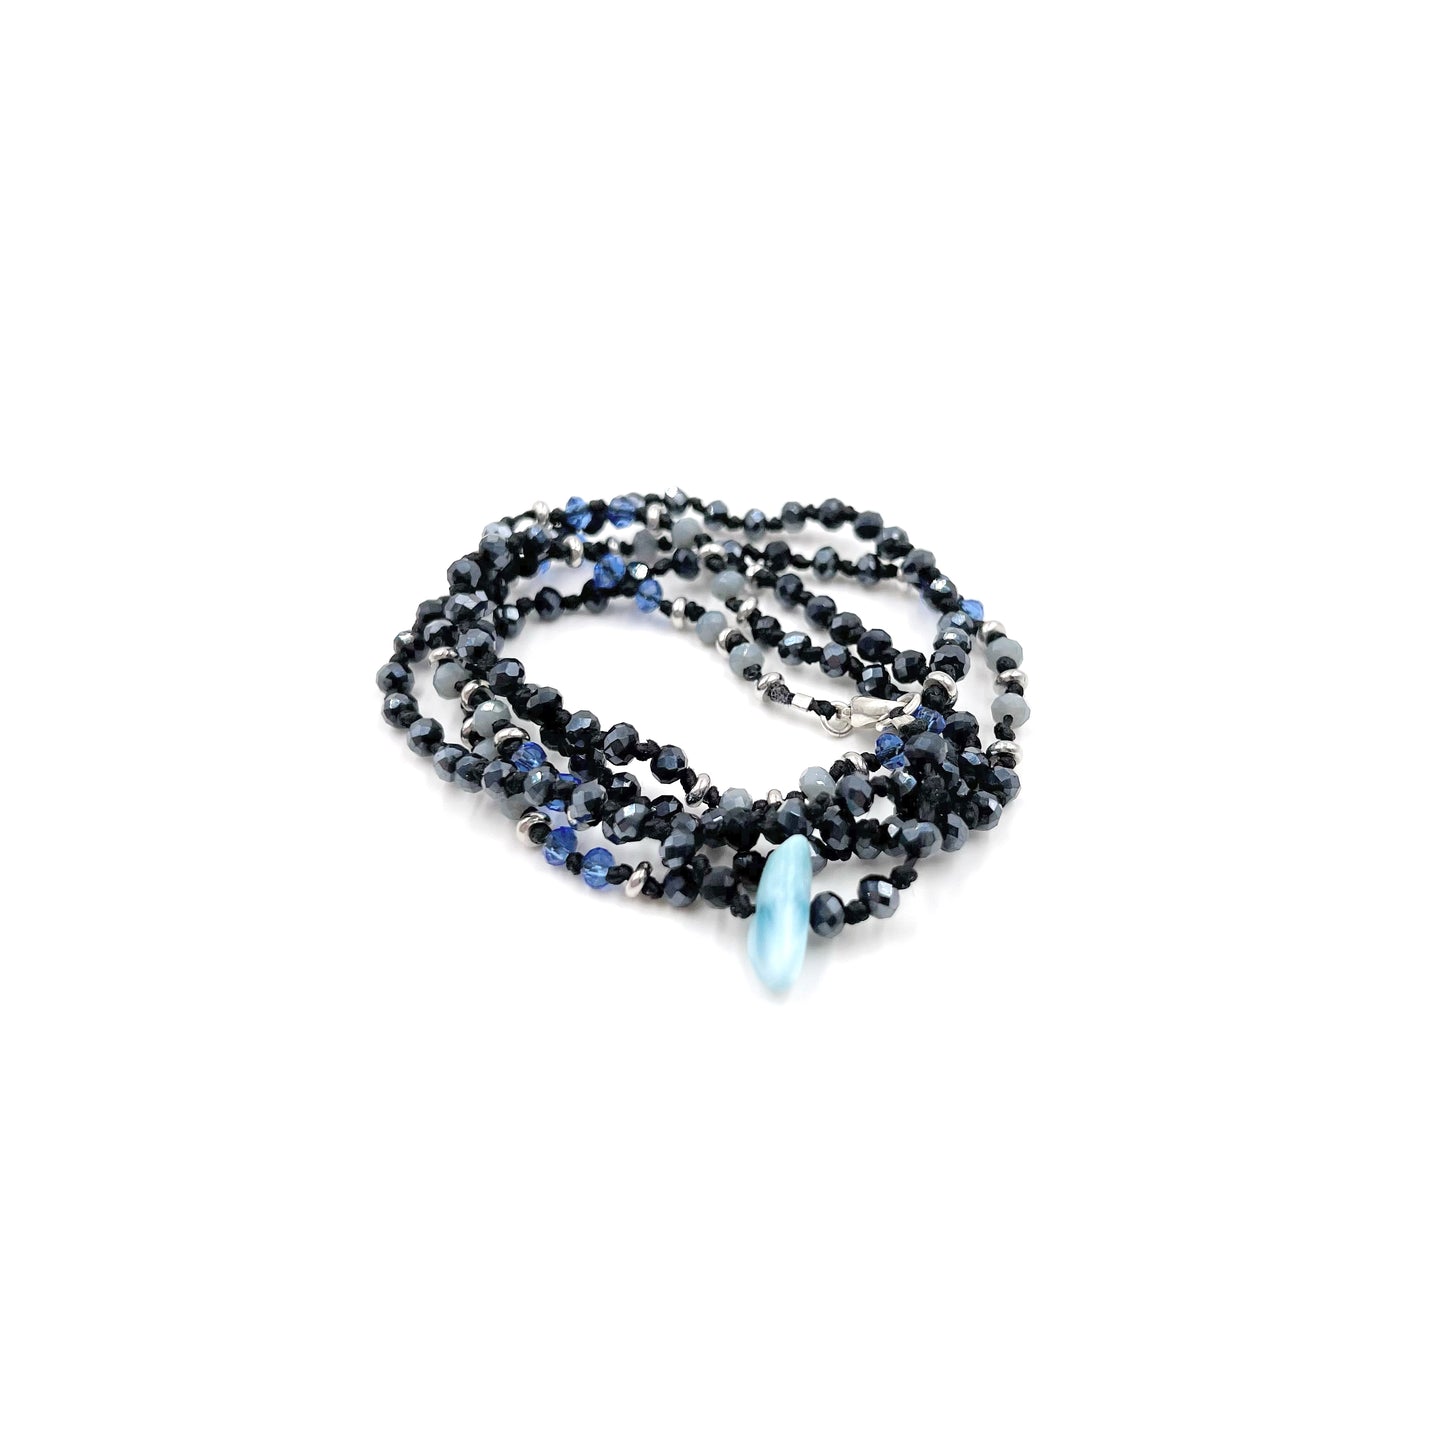 Yocasta Knotted Bead Necklace